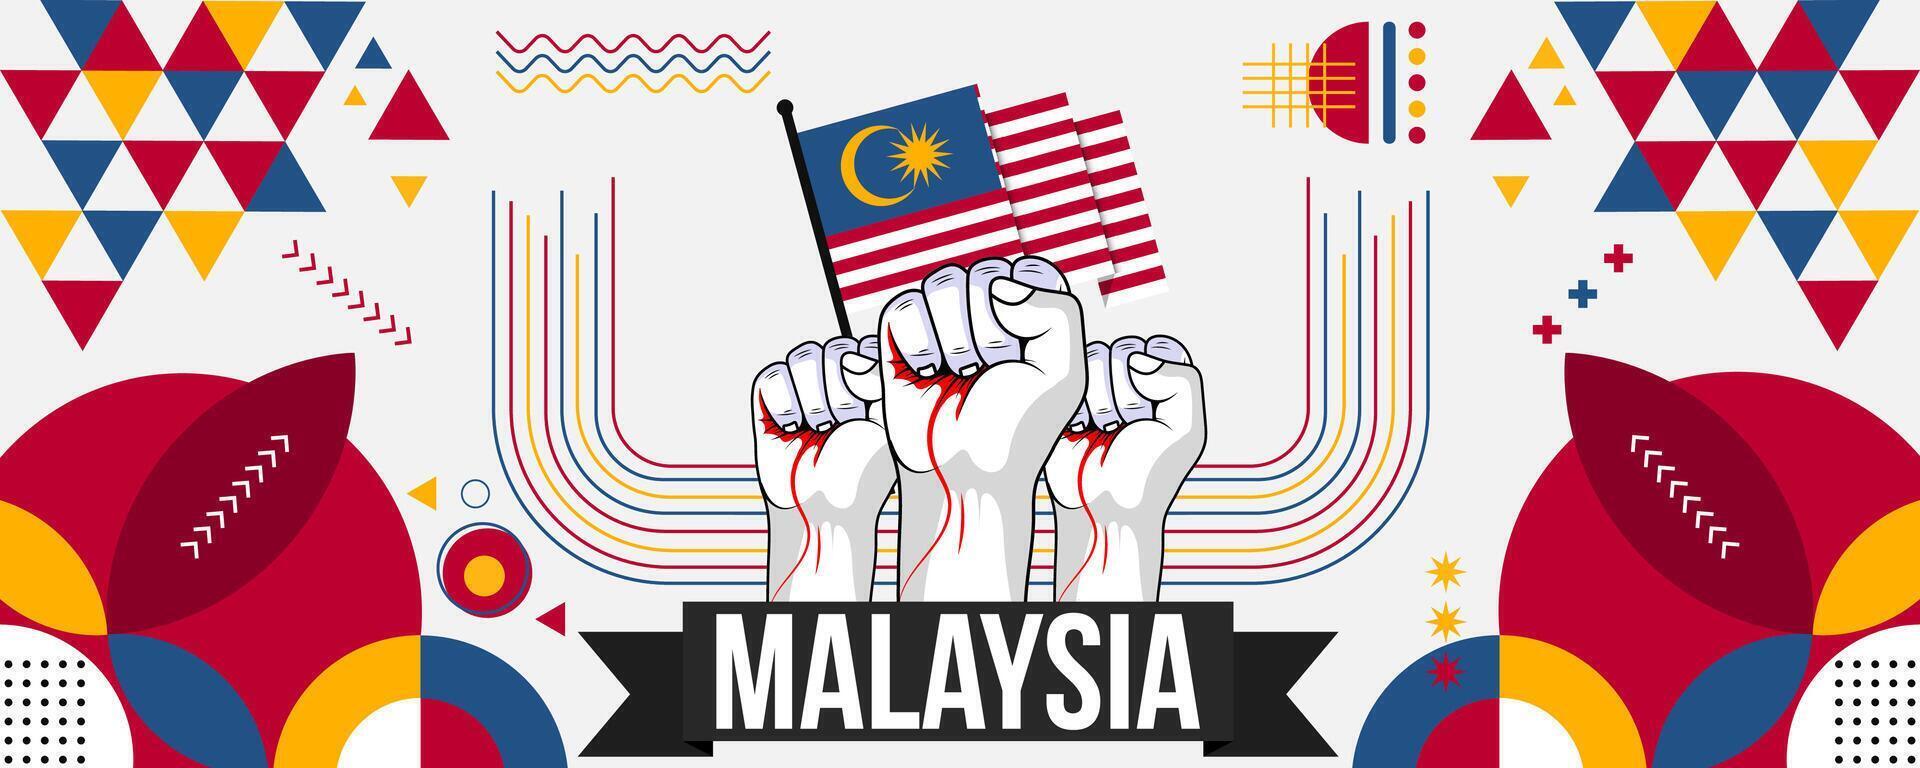 Malaysia national or independence day banner for country celebration. Flag of Malaysia with raised fists. Modern retro design with typorgaphy abstract geometric icons. Vector illustration.